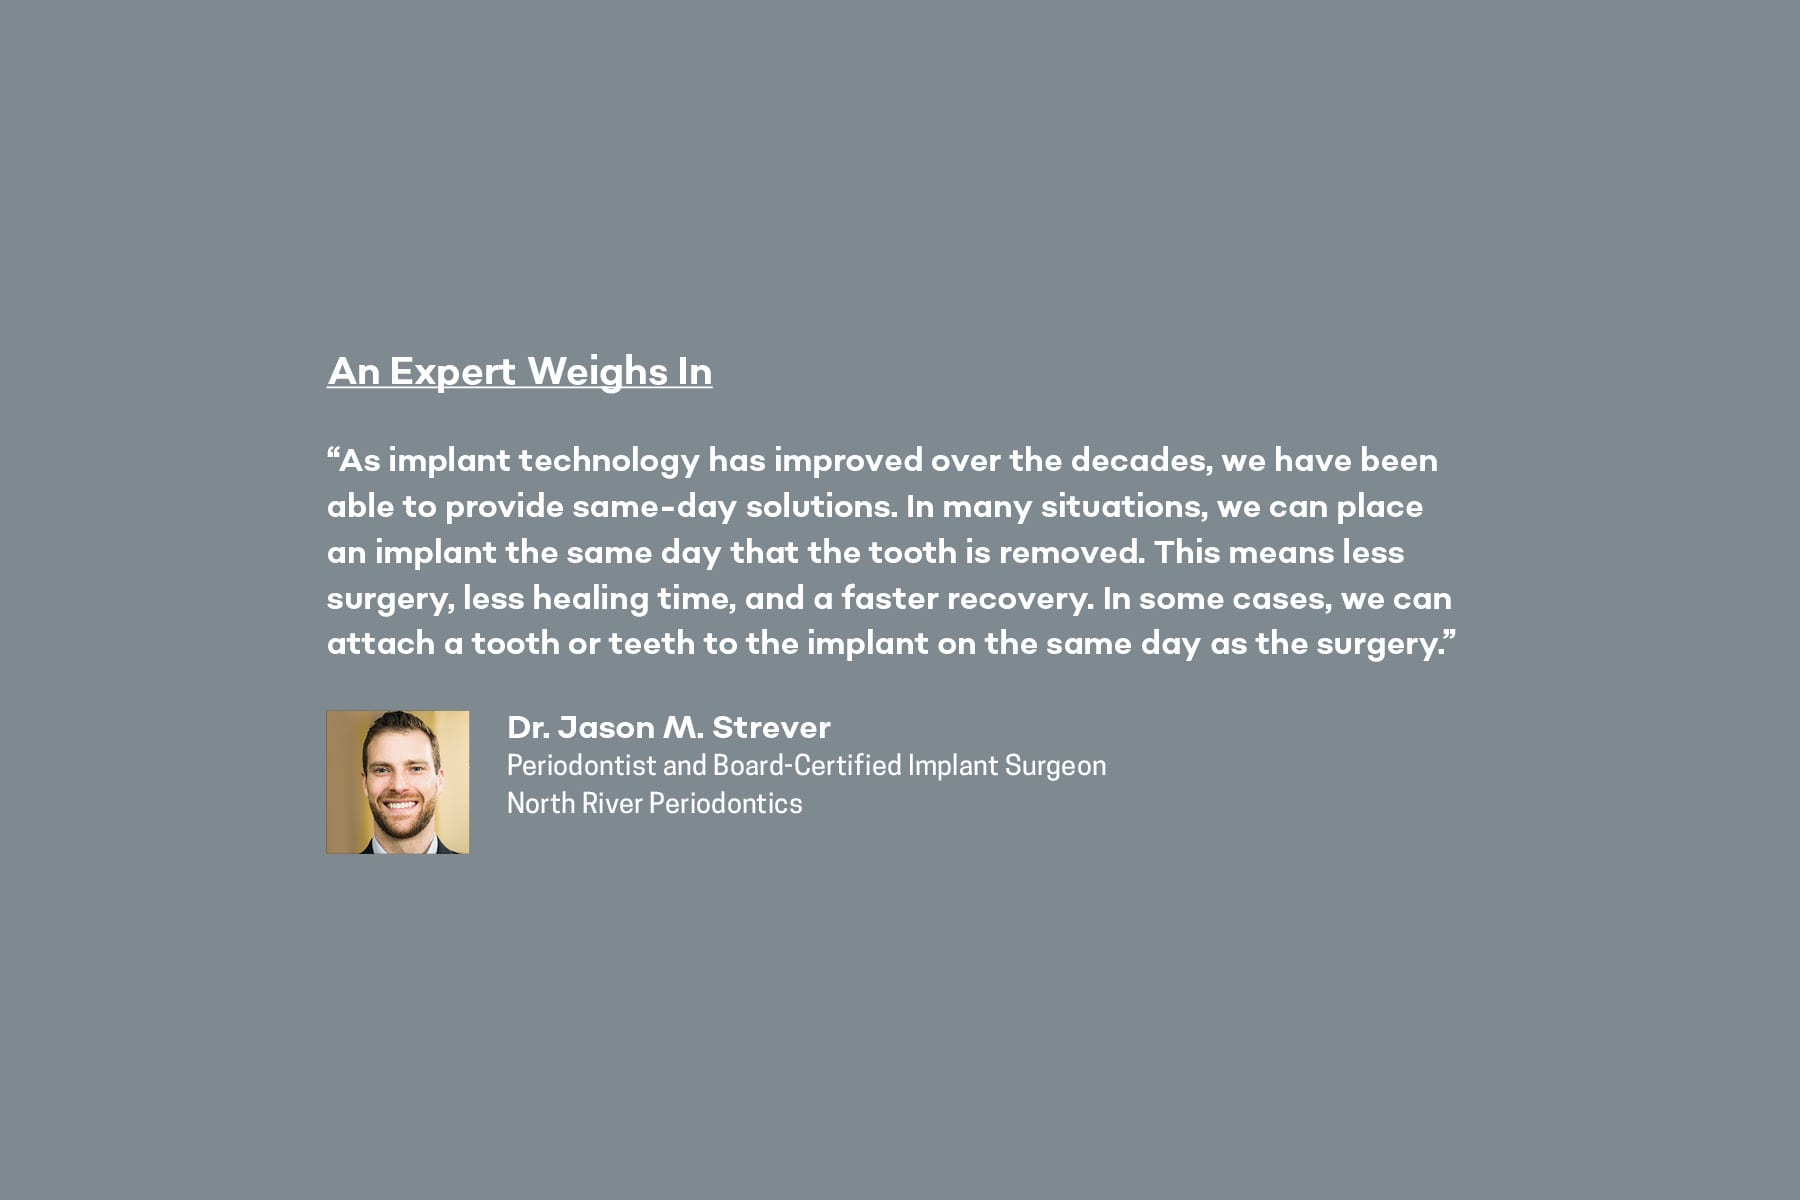 Dr. Jason M. Strever quote on preserving bone with dental implants